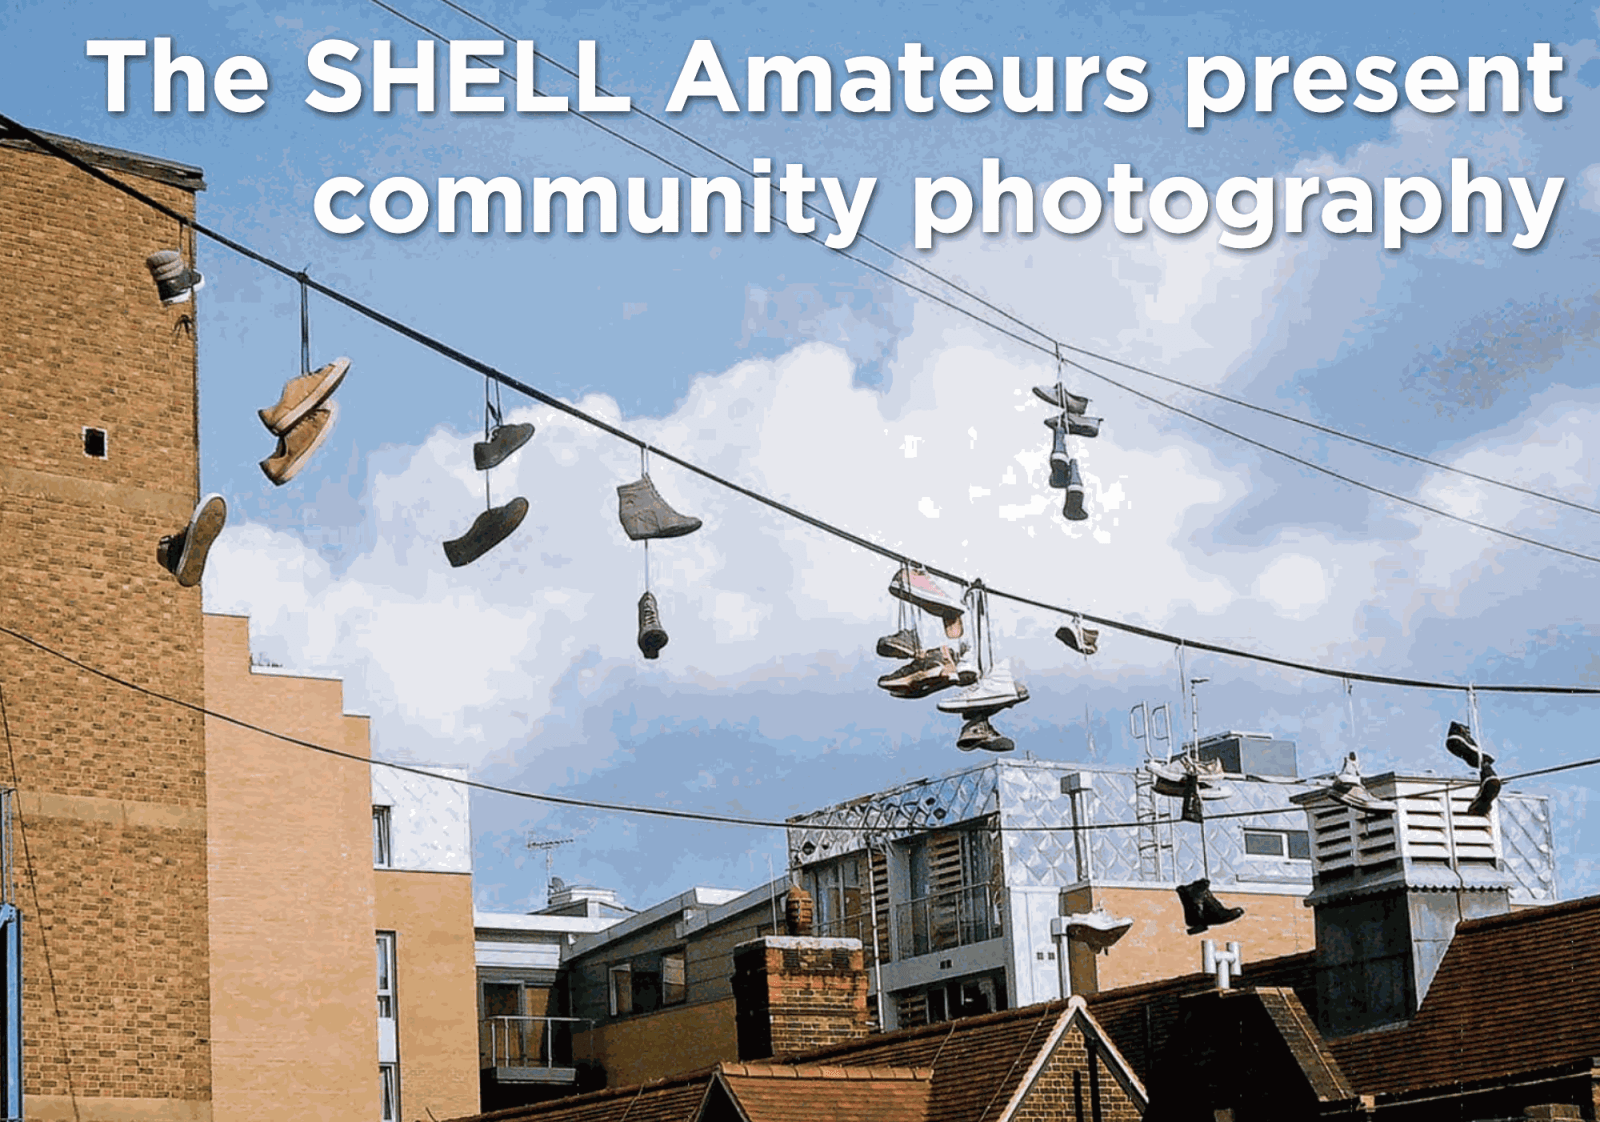 The SHELL Amateurs: Community Photography Read it here